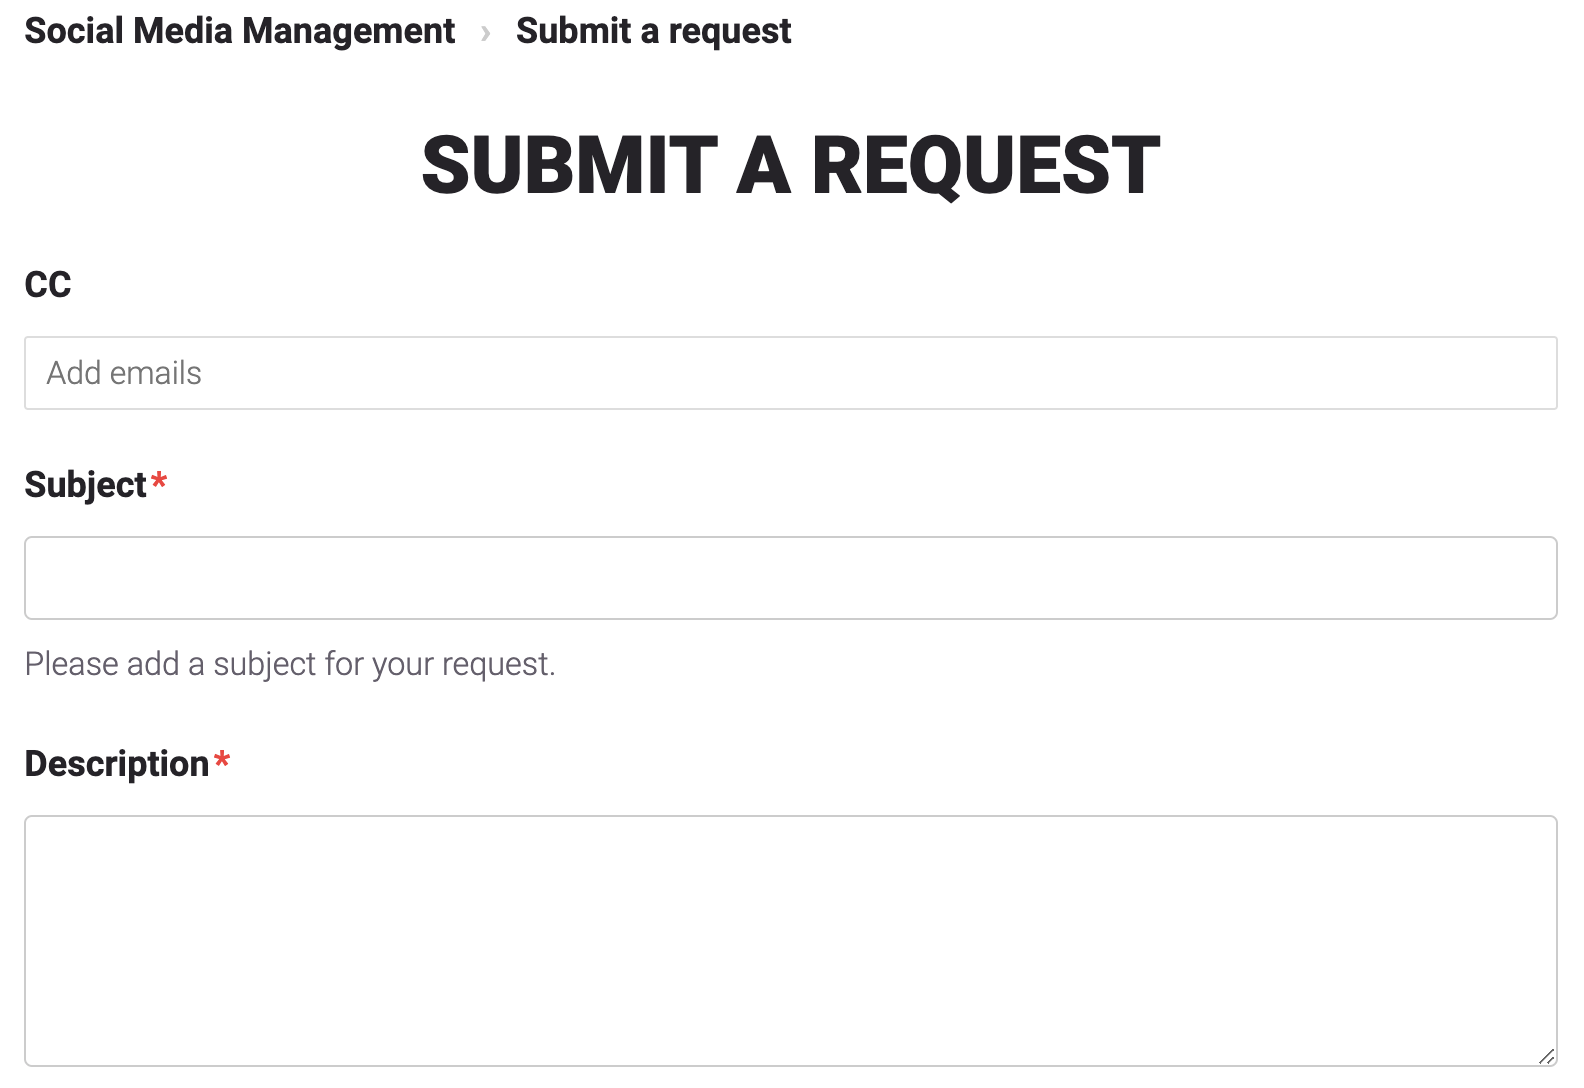 Support request form.png